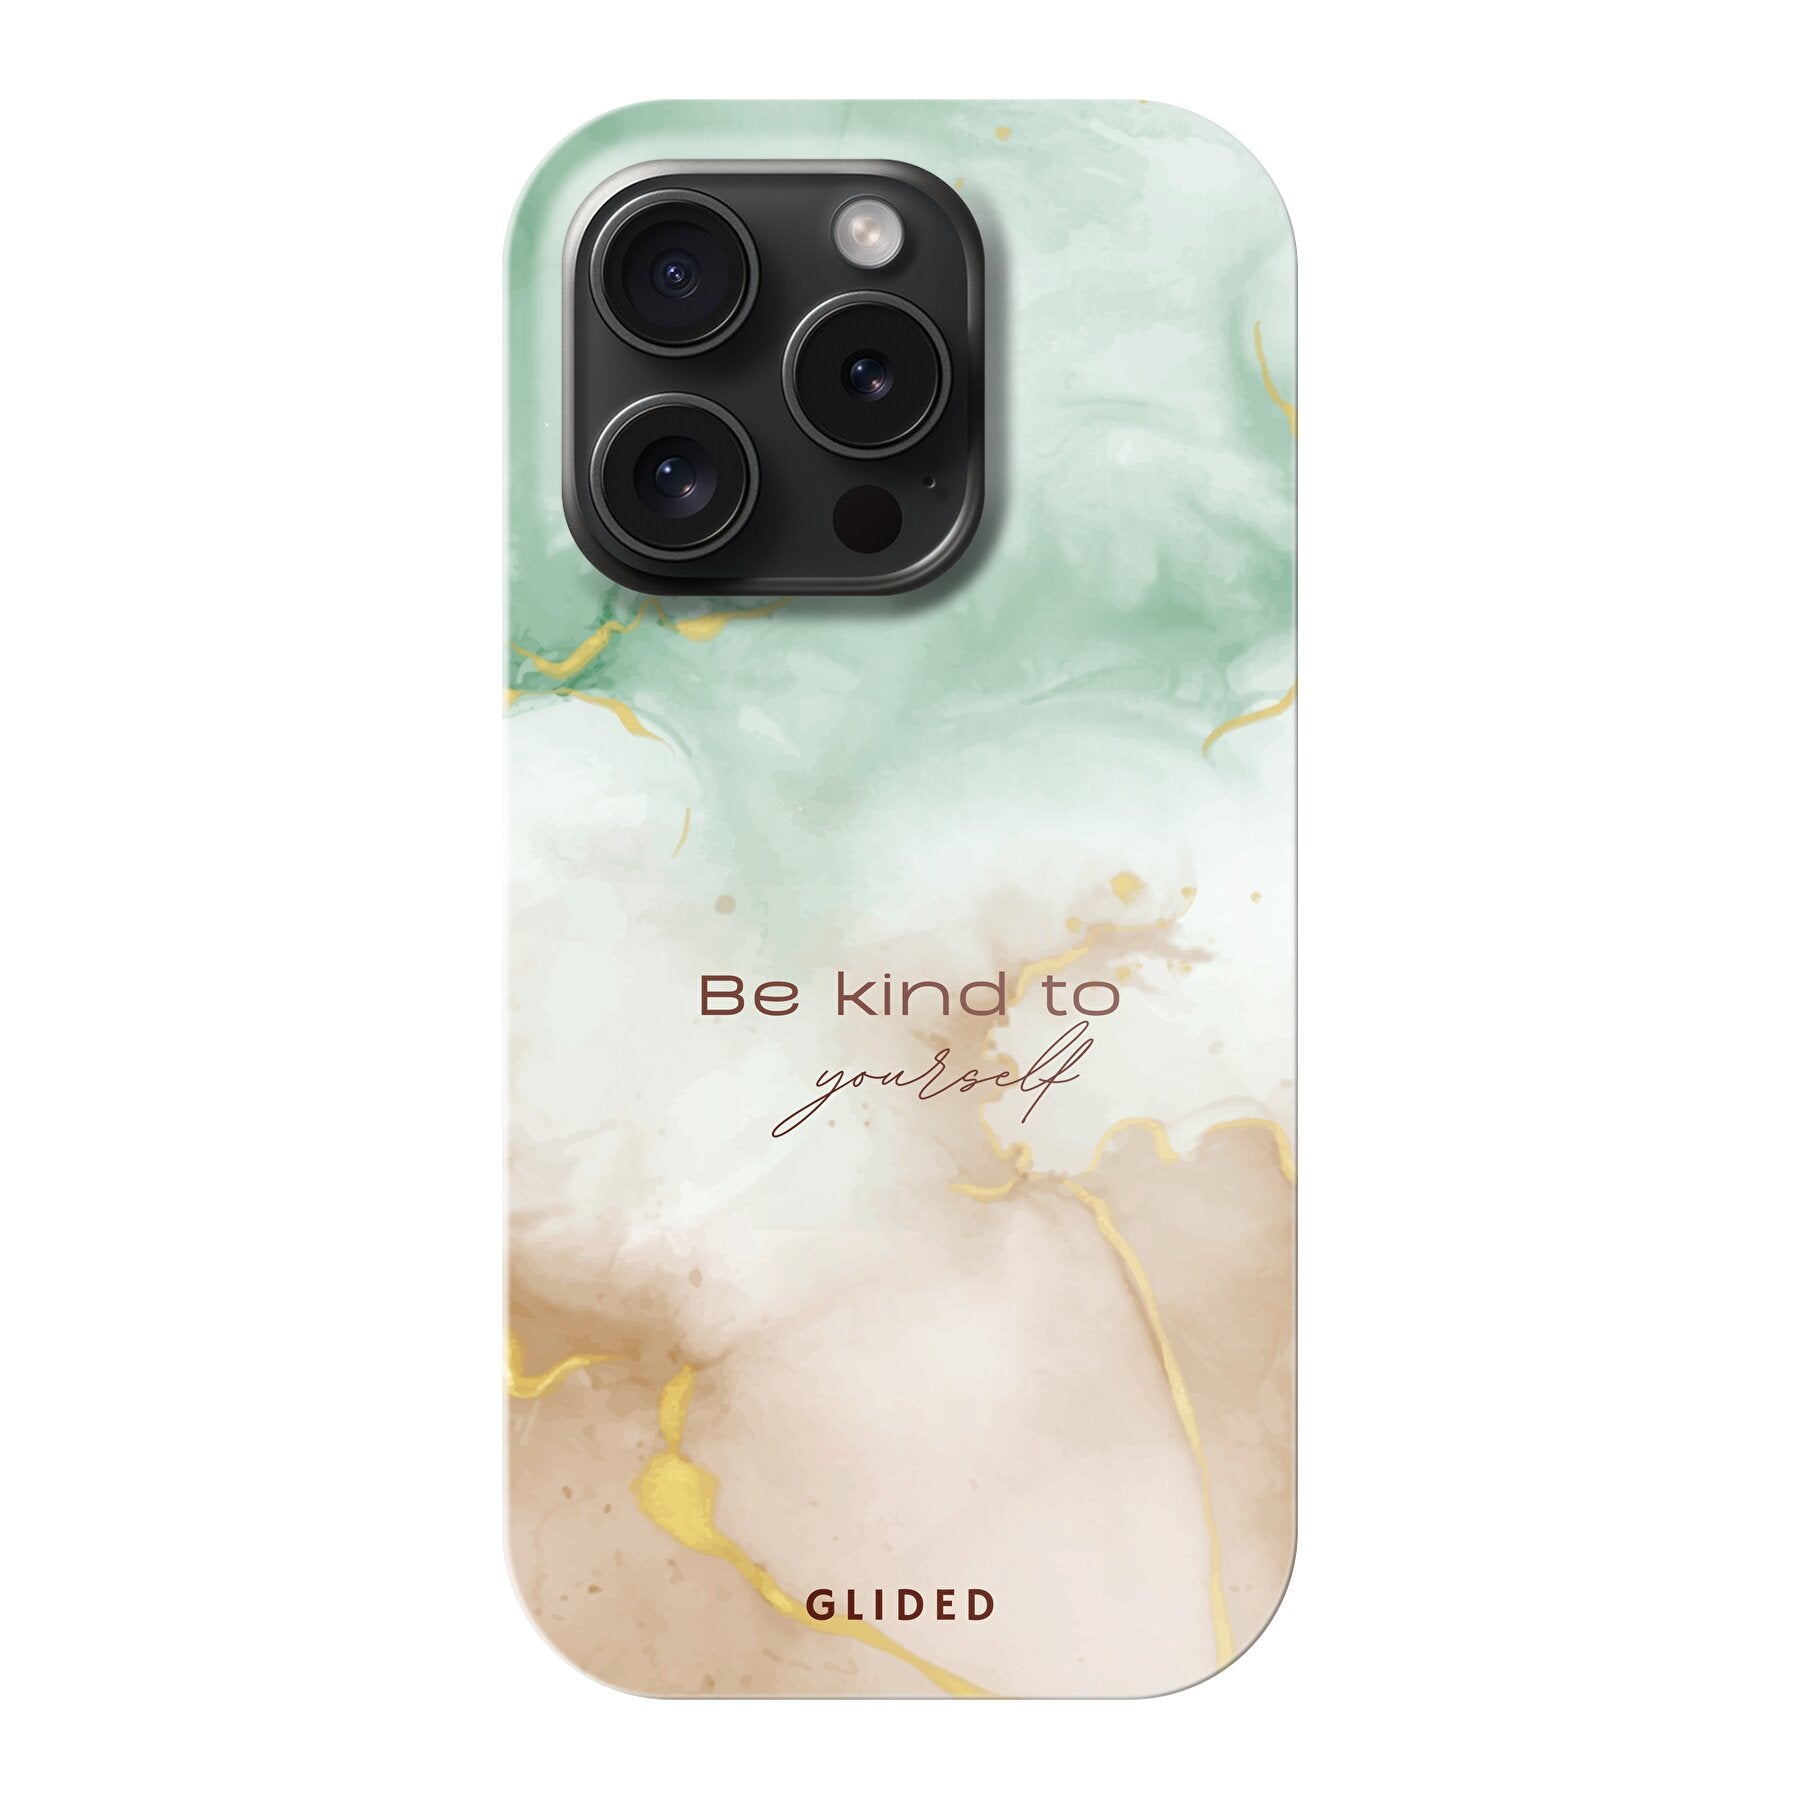 Kind to yourself - iPhone 15 Pro Handyhülle Tough case